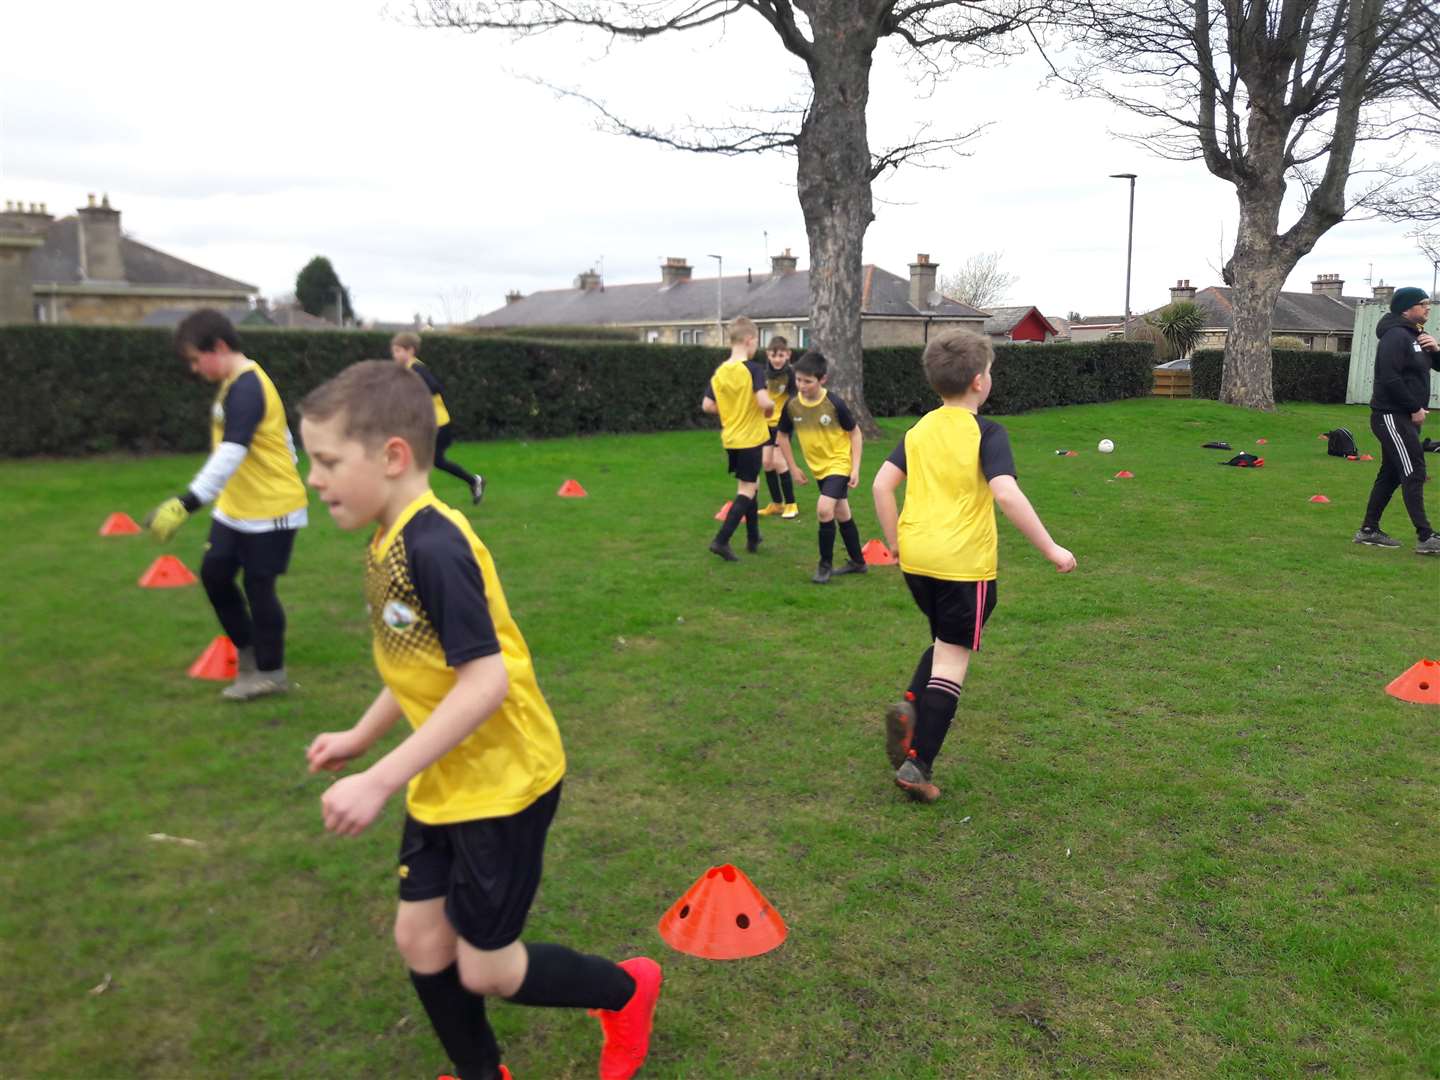 Cans' youth training carried out with all Covid restrictions in place